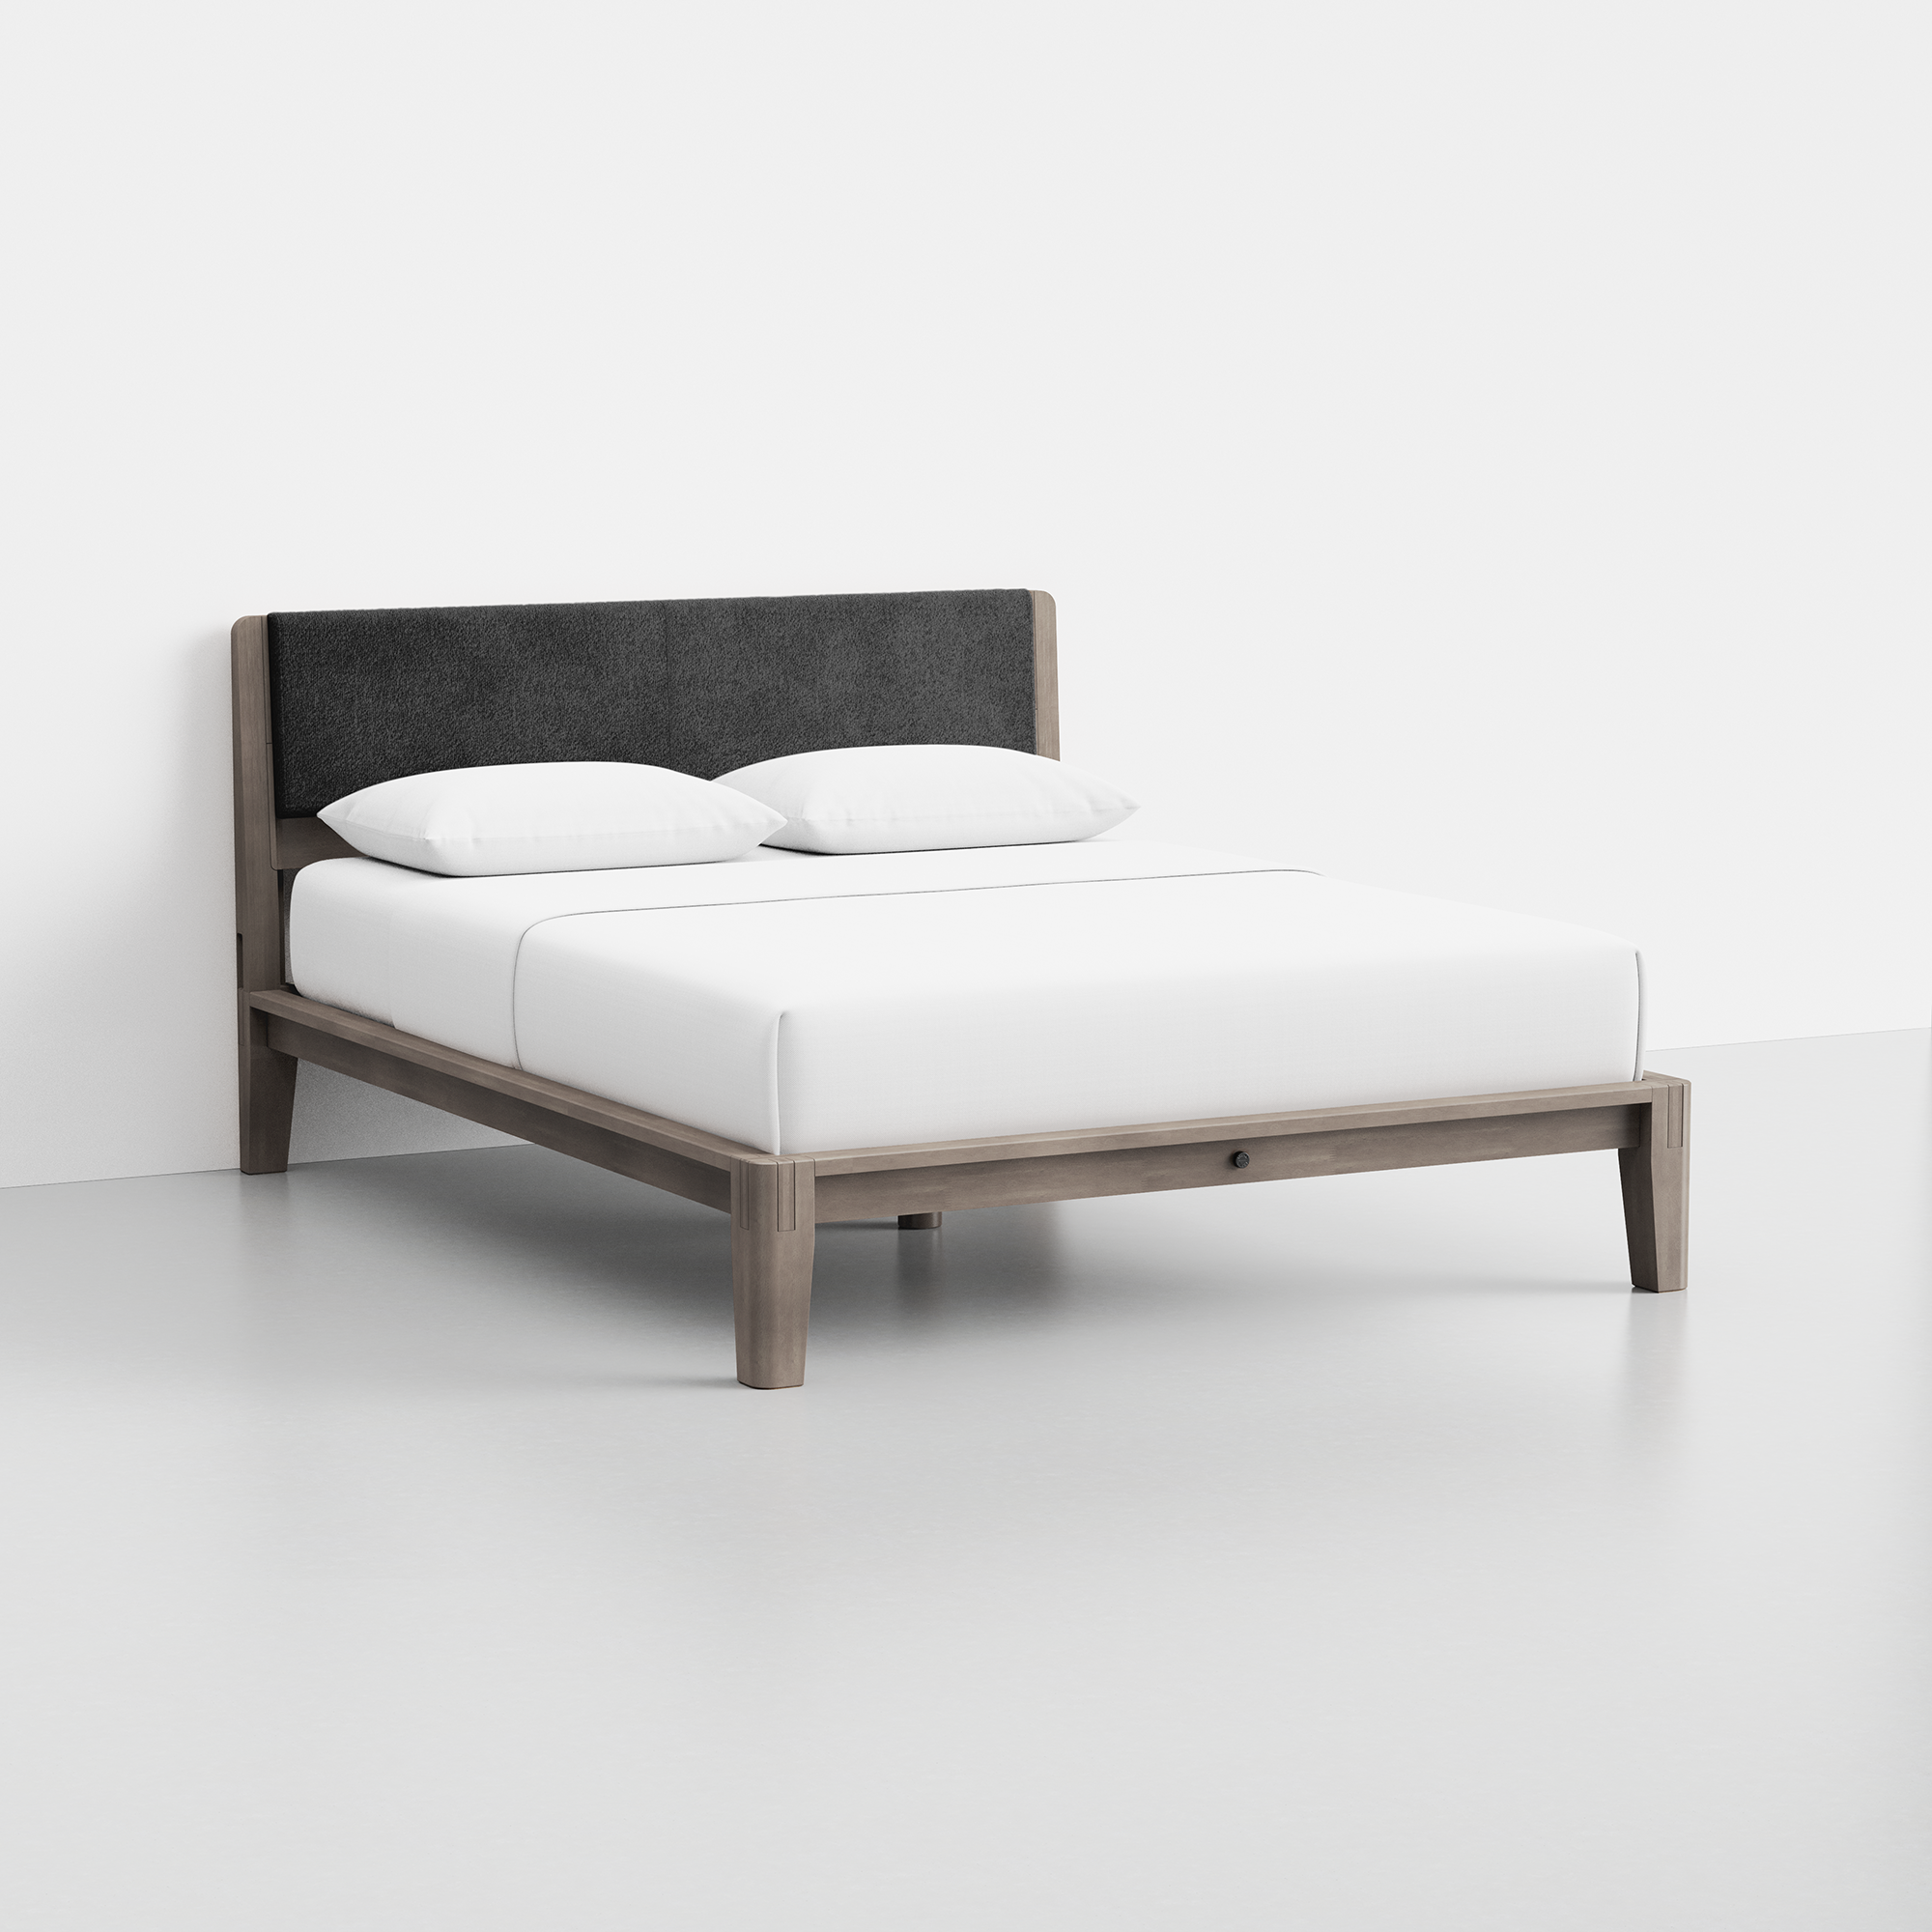 The Bed (Grey / HB Cushion Graphite) - Render - Angled